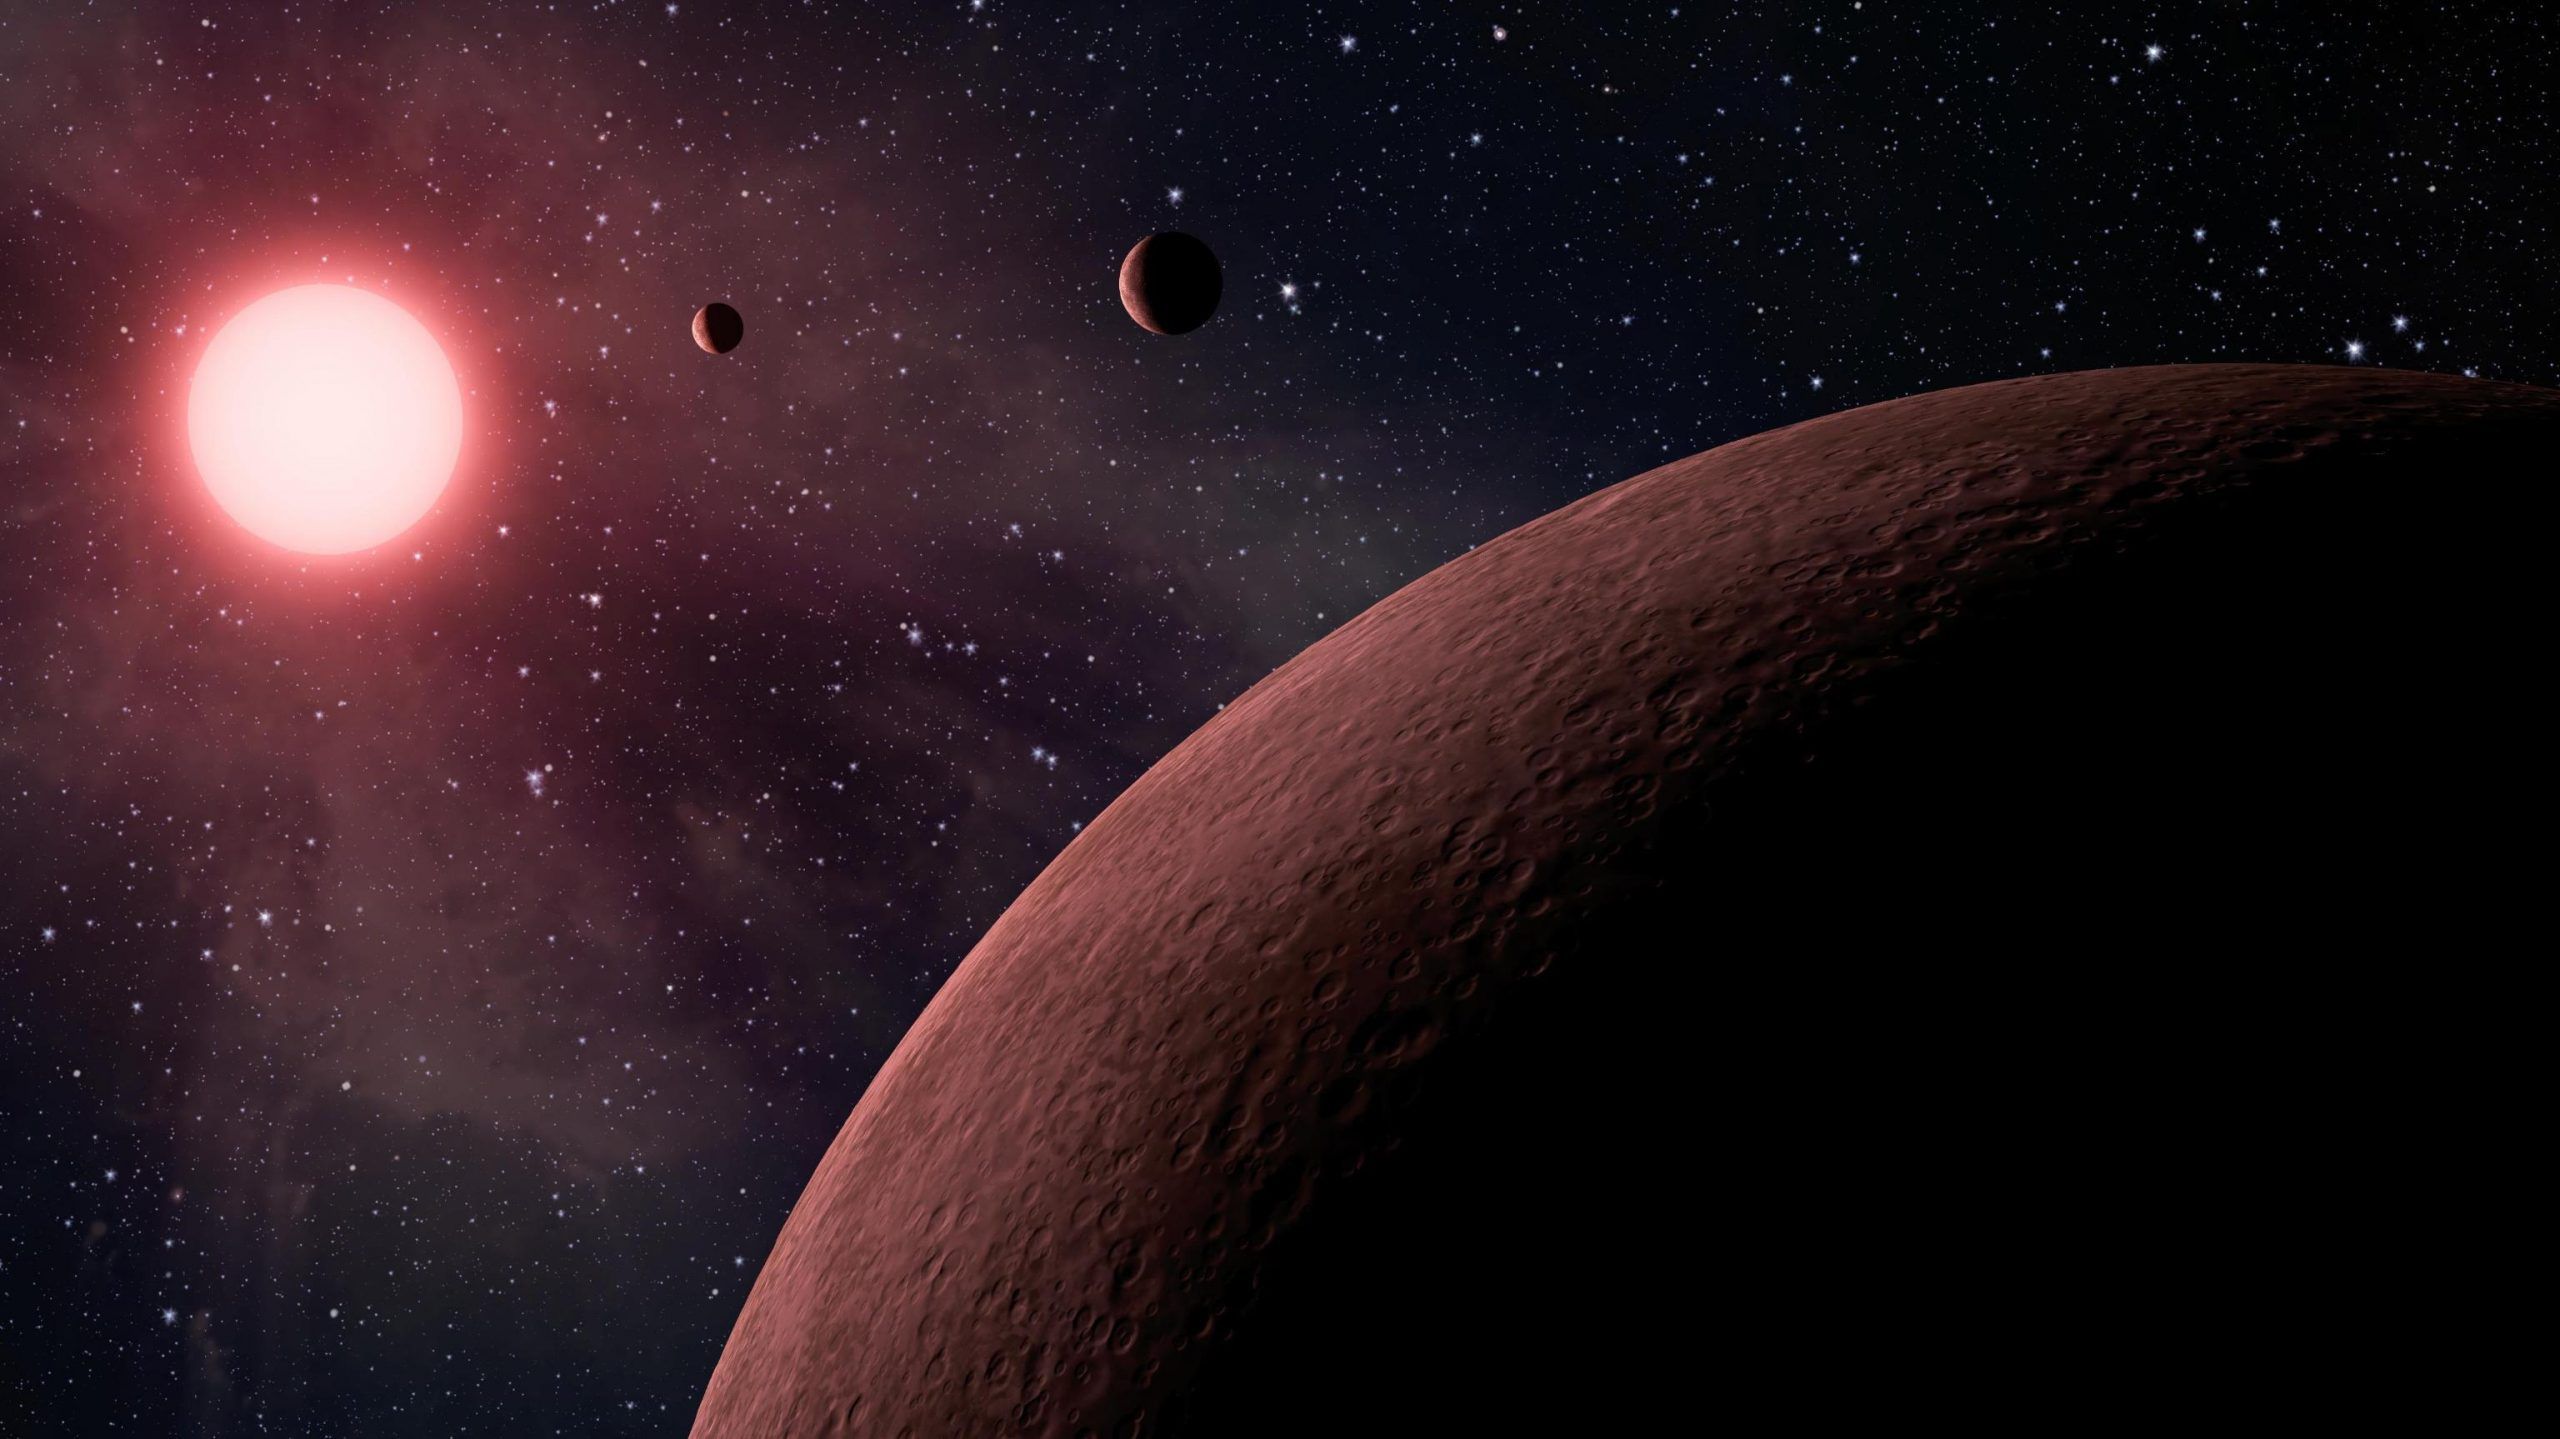 NASA's Kepler space telescope team identify 10 near Earth size planets in the habitable zone of their star